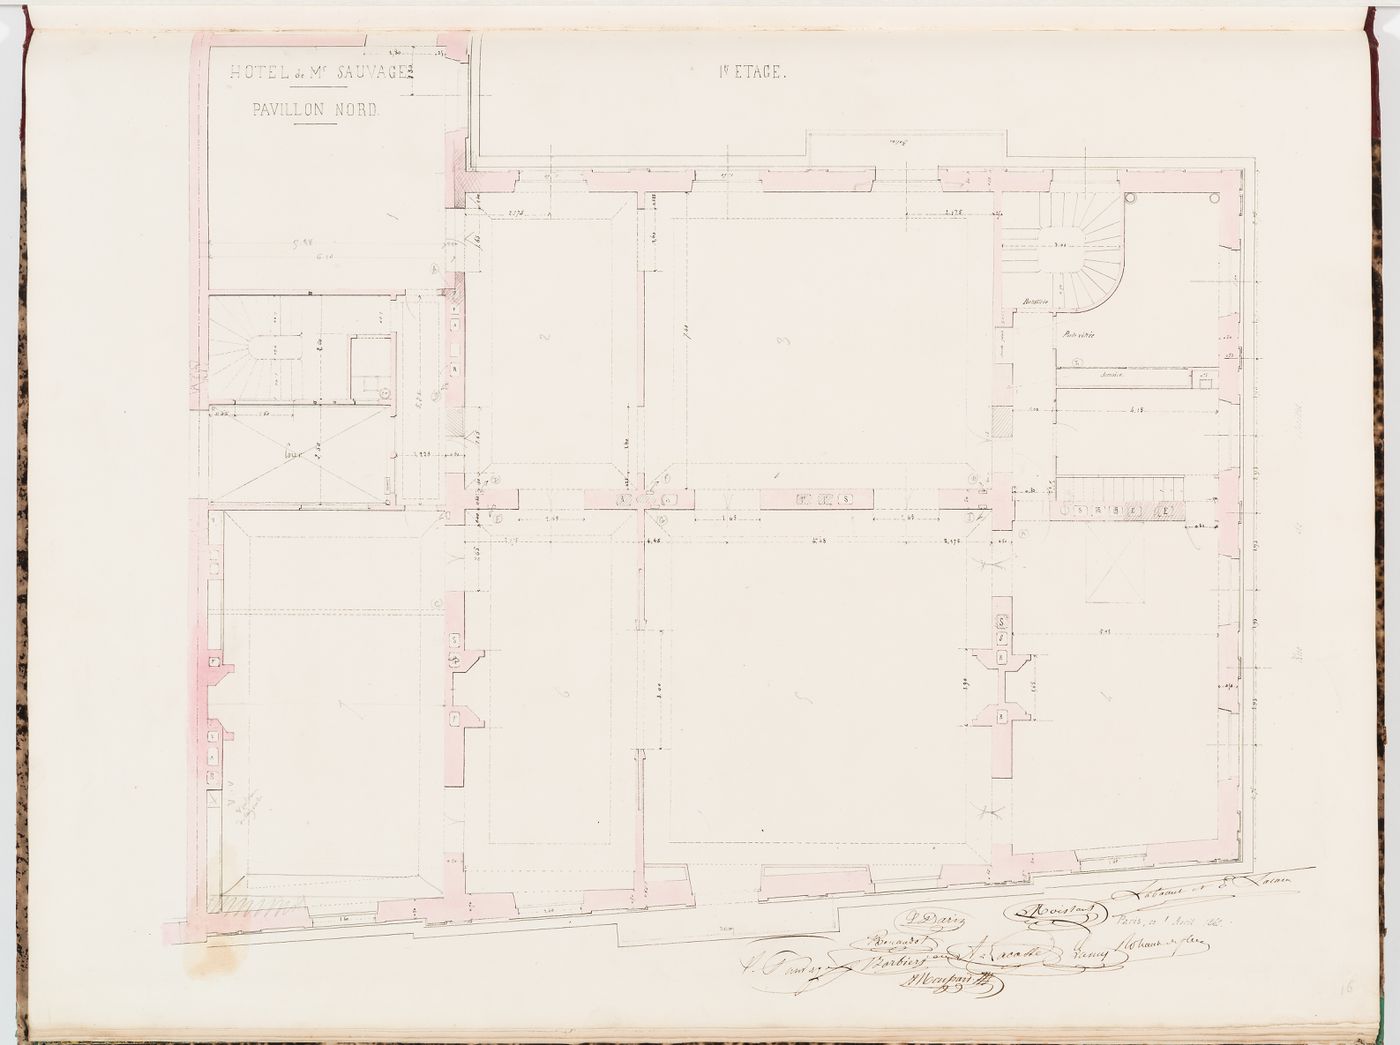 First floor plan for the "pavillon nord" for Hôtel Sauvage for Paris